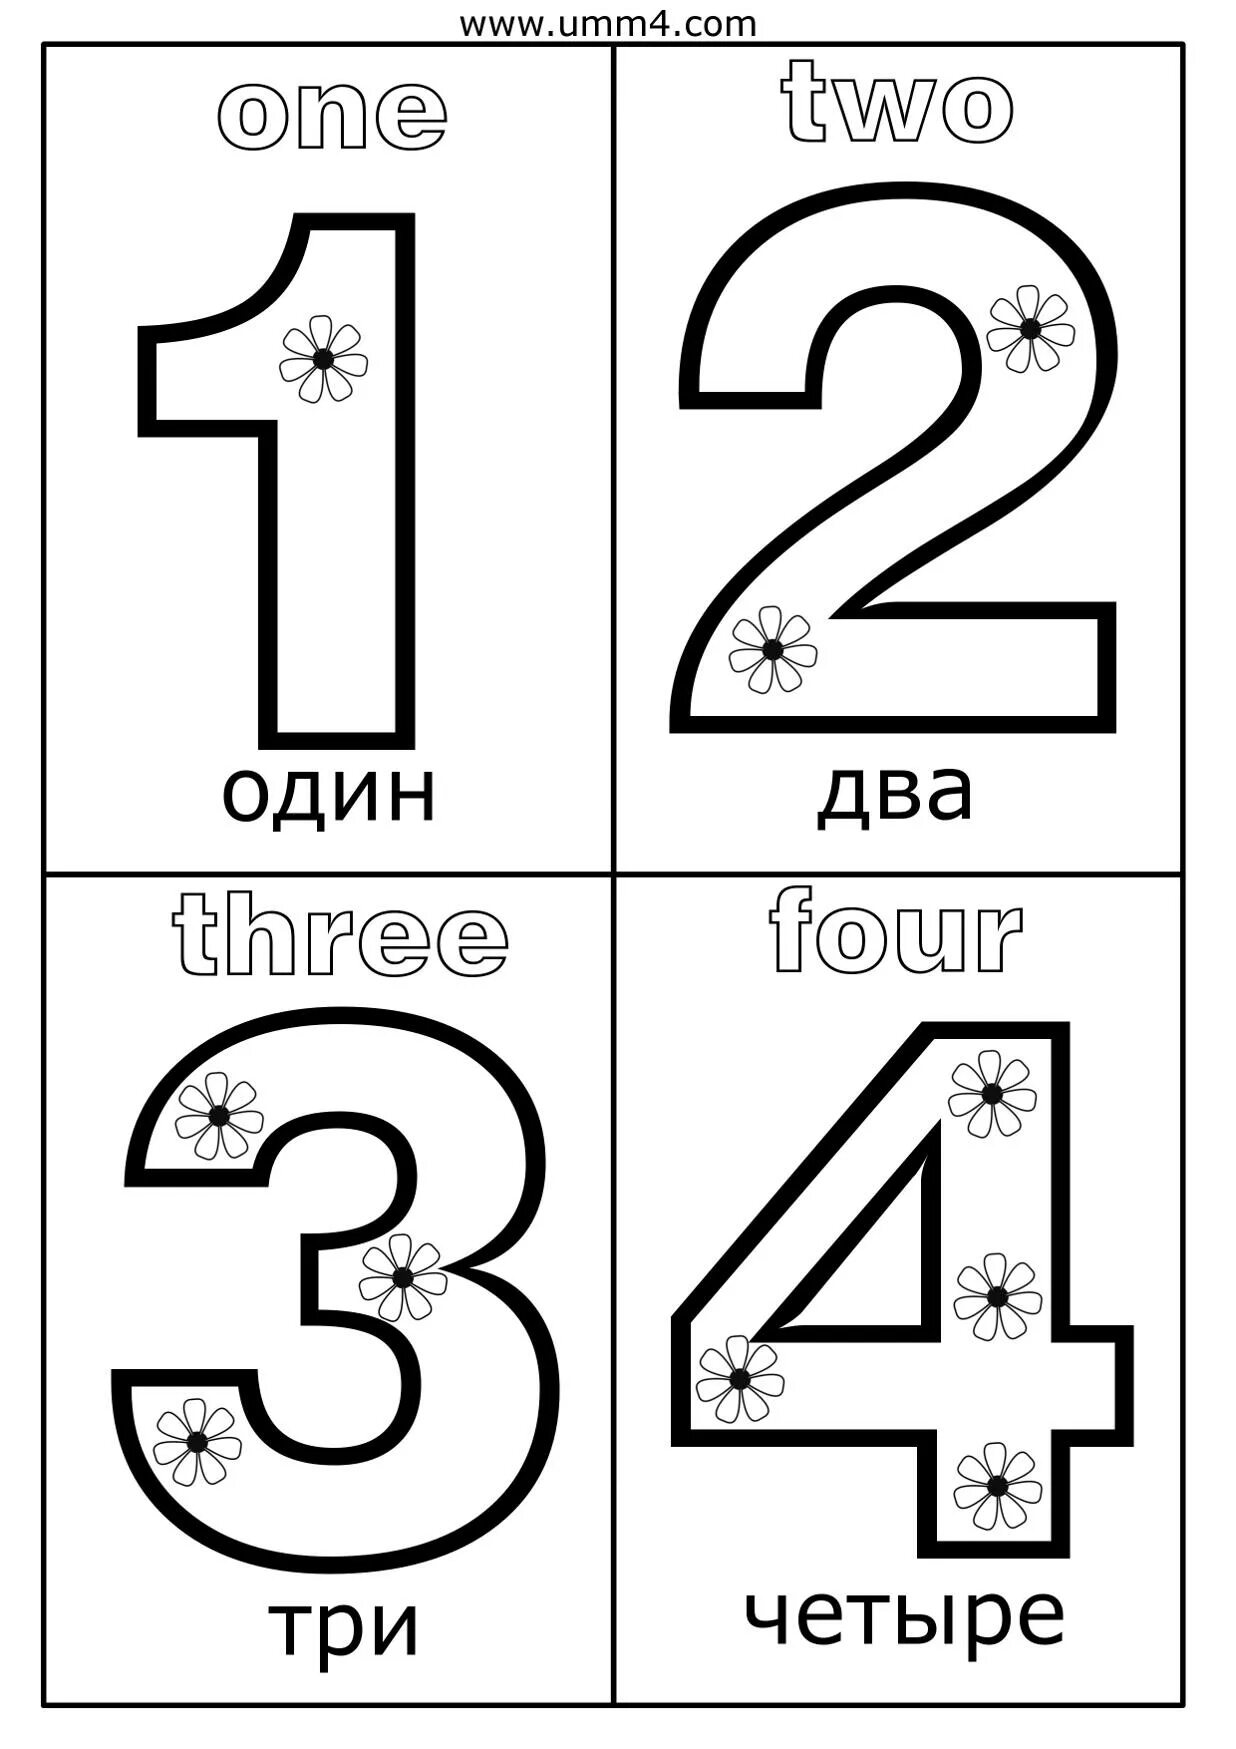 Bright English Numbers Coloring Pages in English for Kids